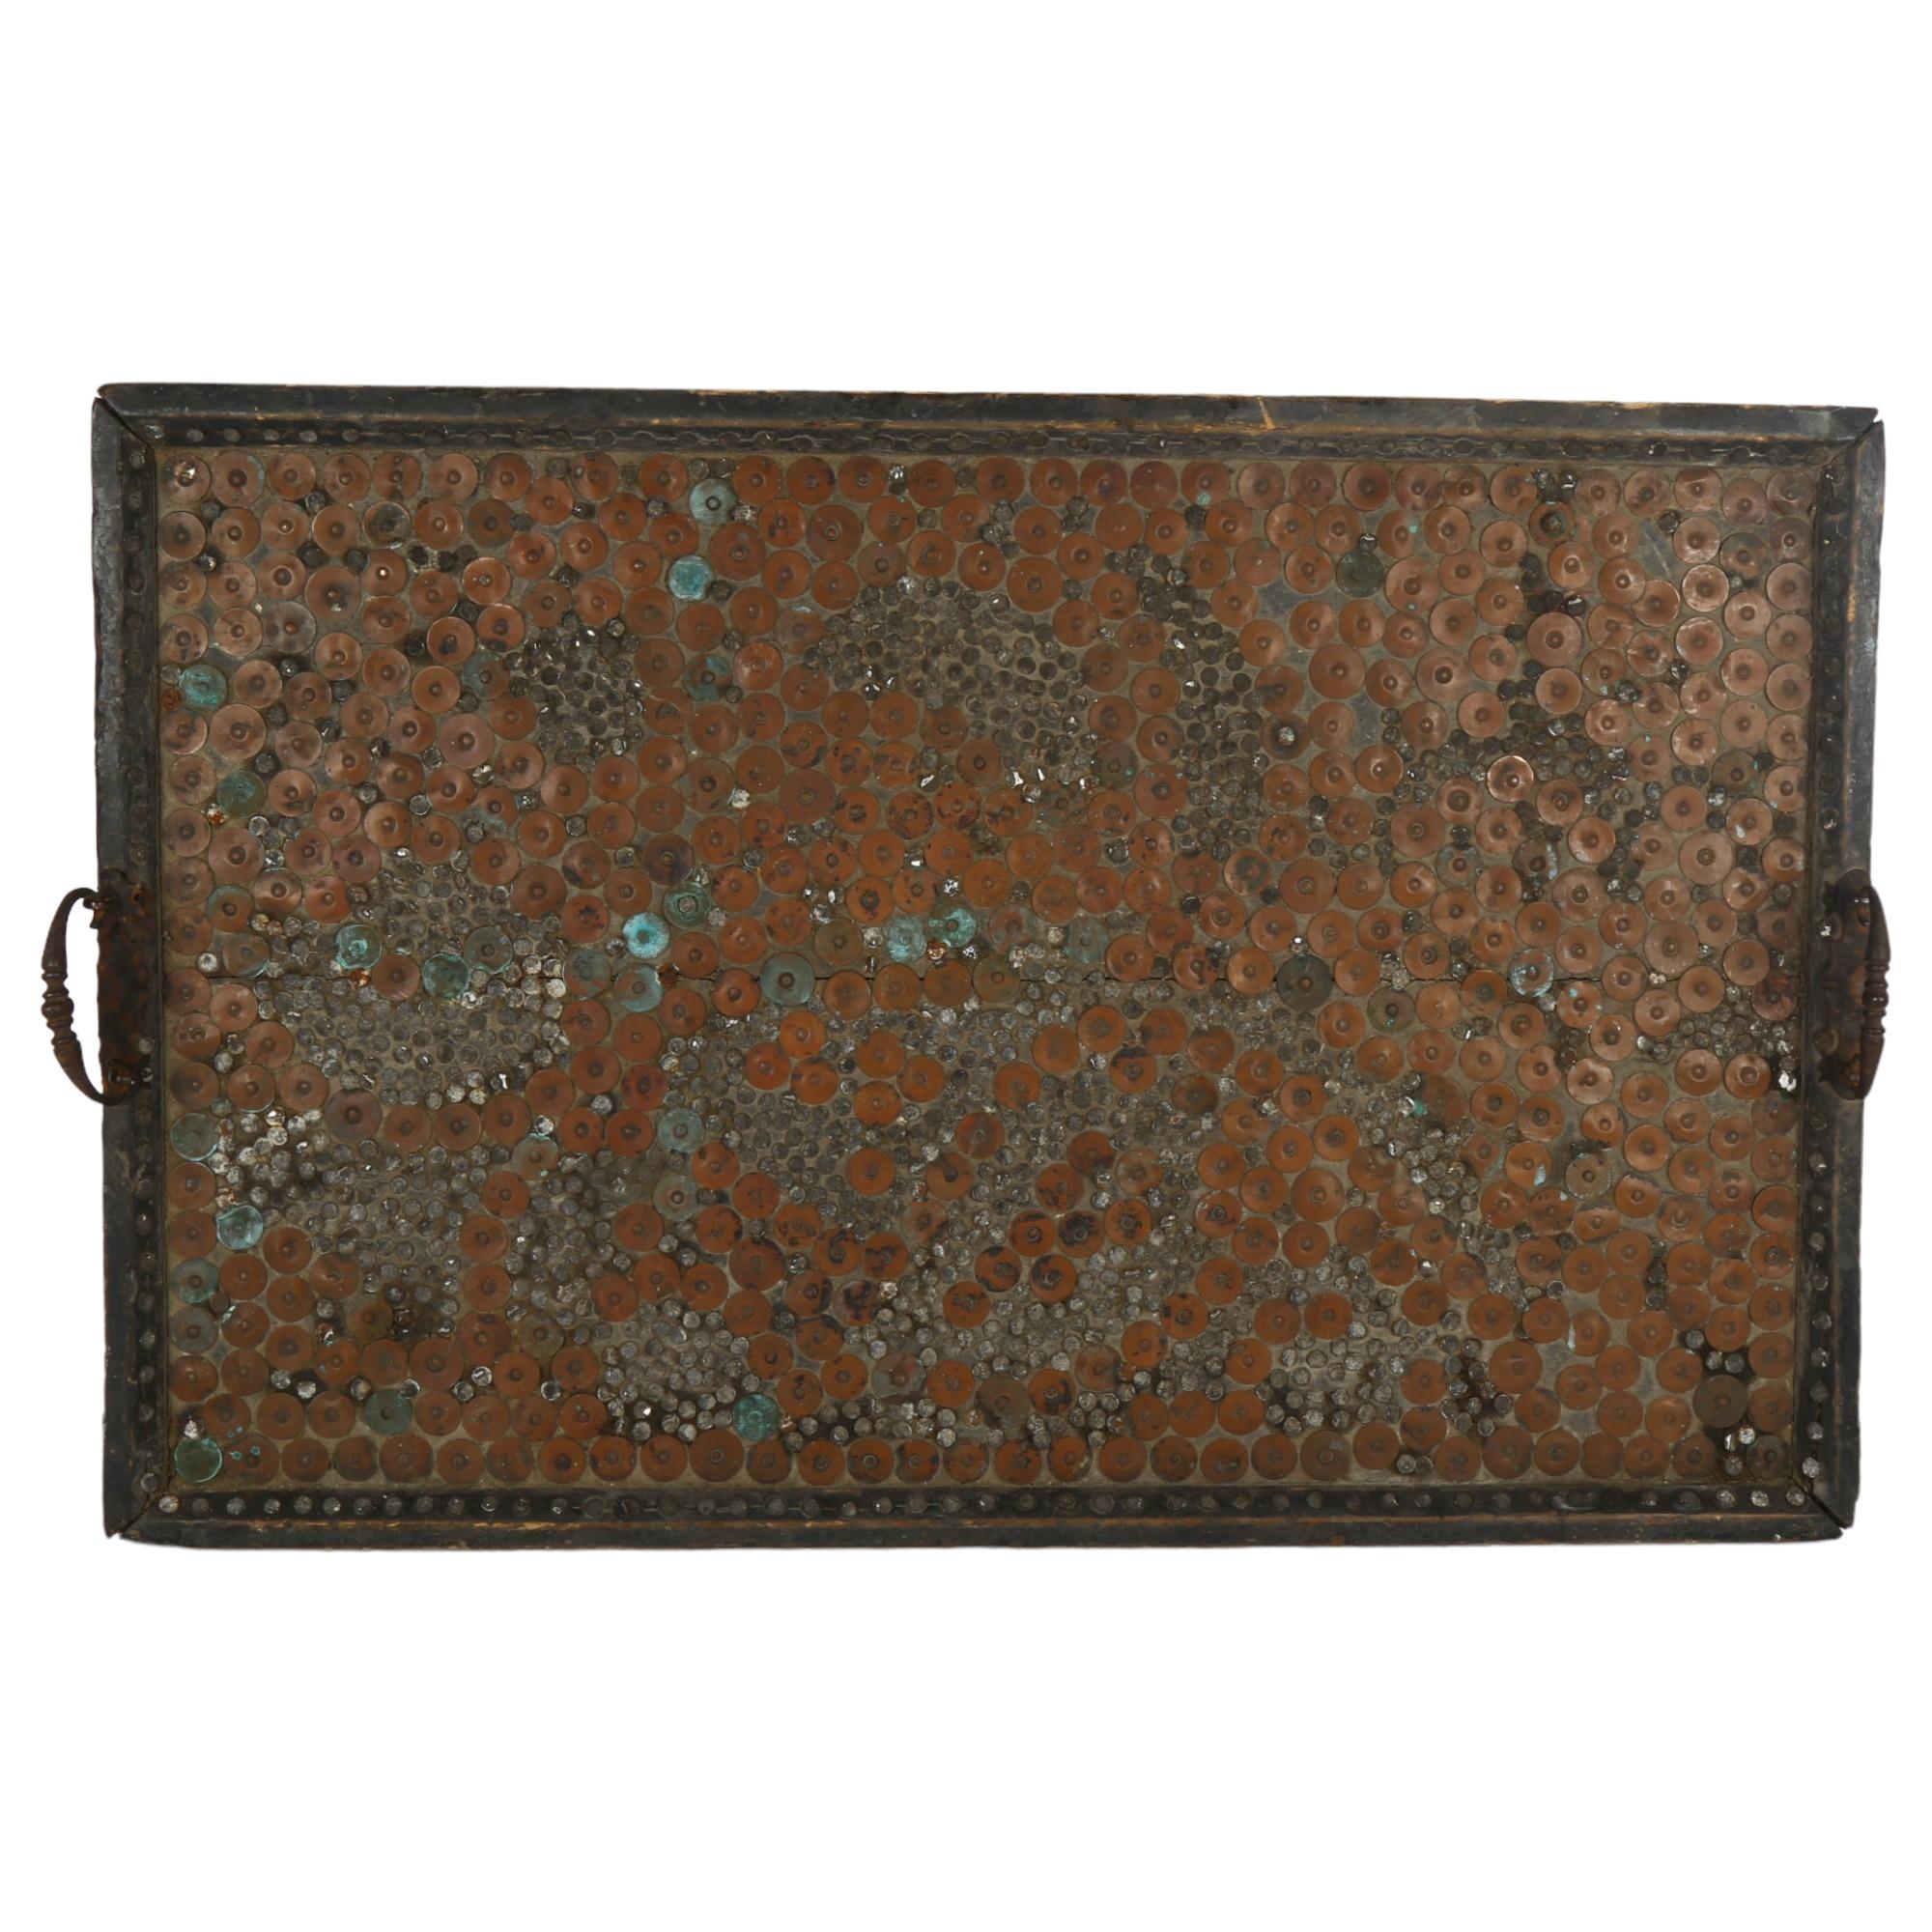 An Anglo-Indian copper riveted 2-handled tray, 71cm x 47cm